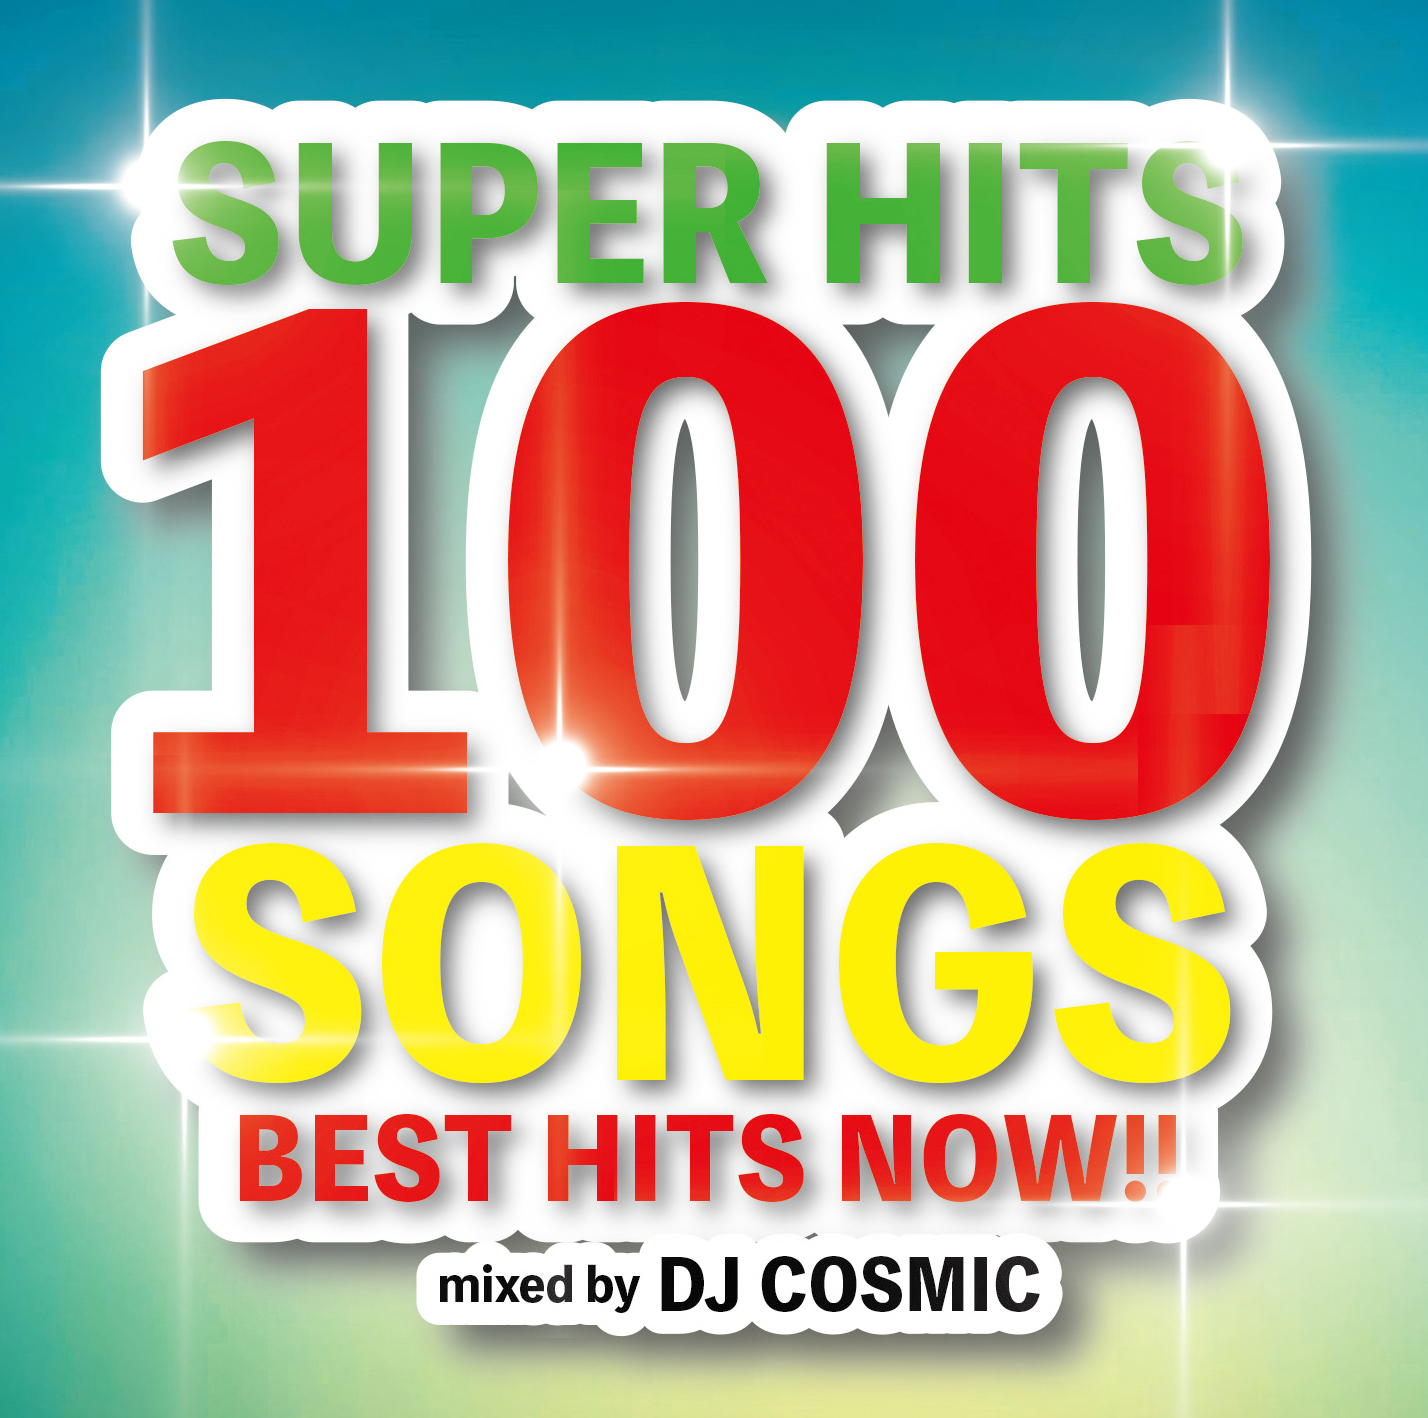 SUPER HITS 100 SONGS -BEST HITS NOW！！ Mixed by DJ COSMIC Vol.2/DJ COSMIC